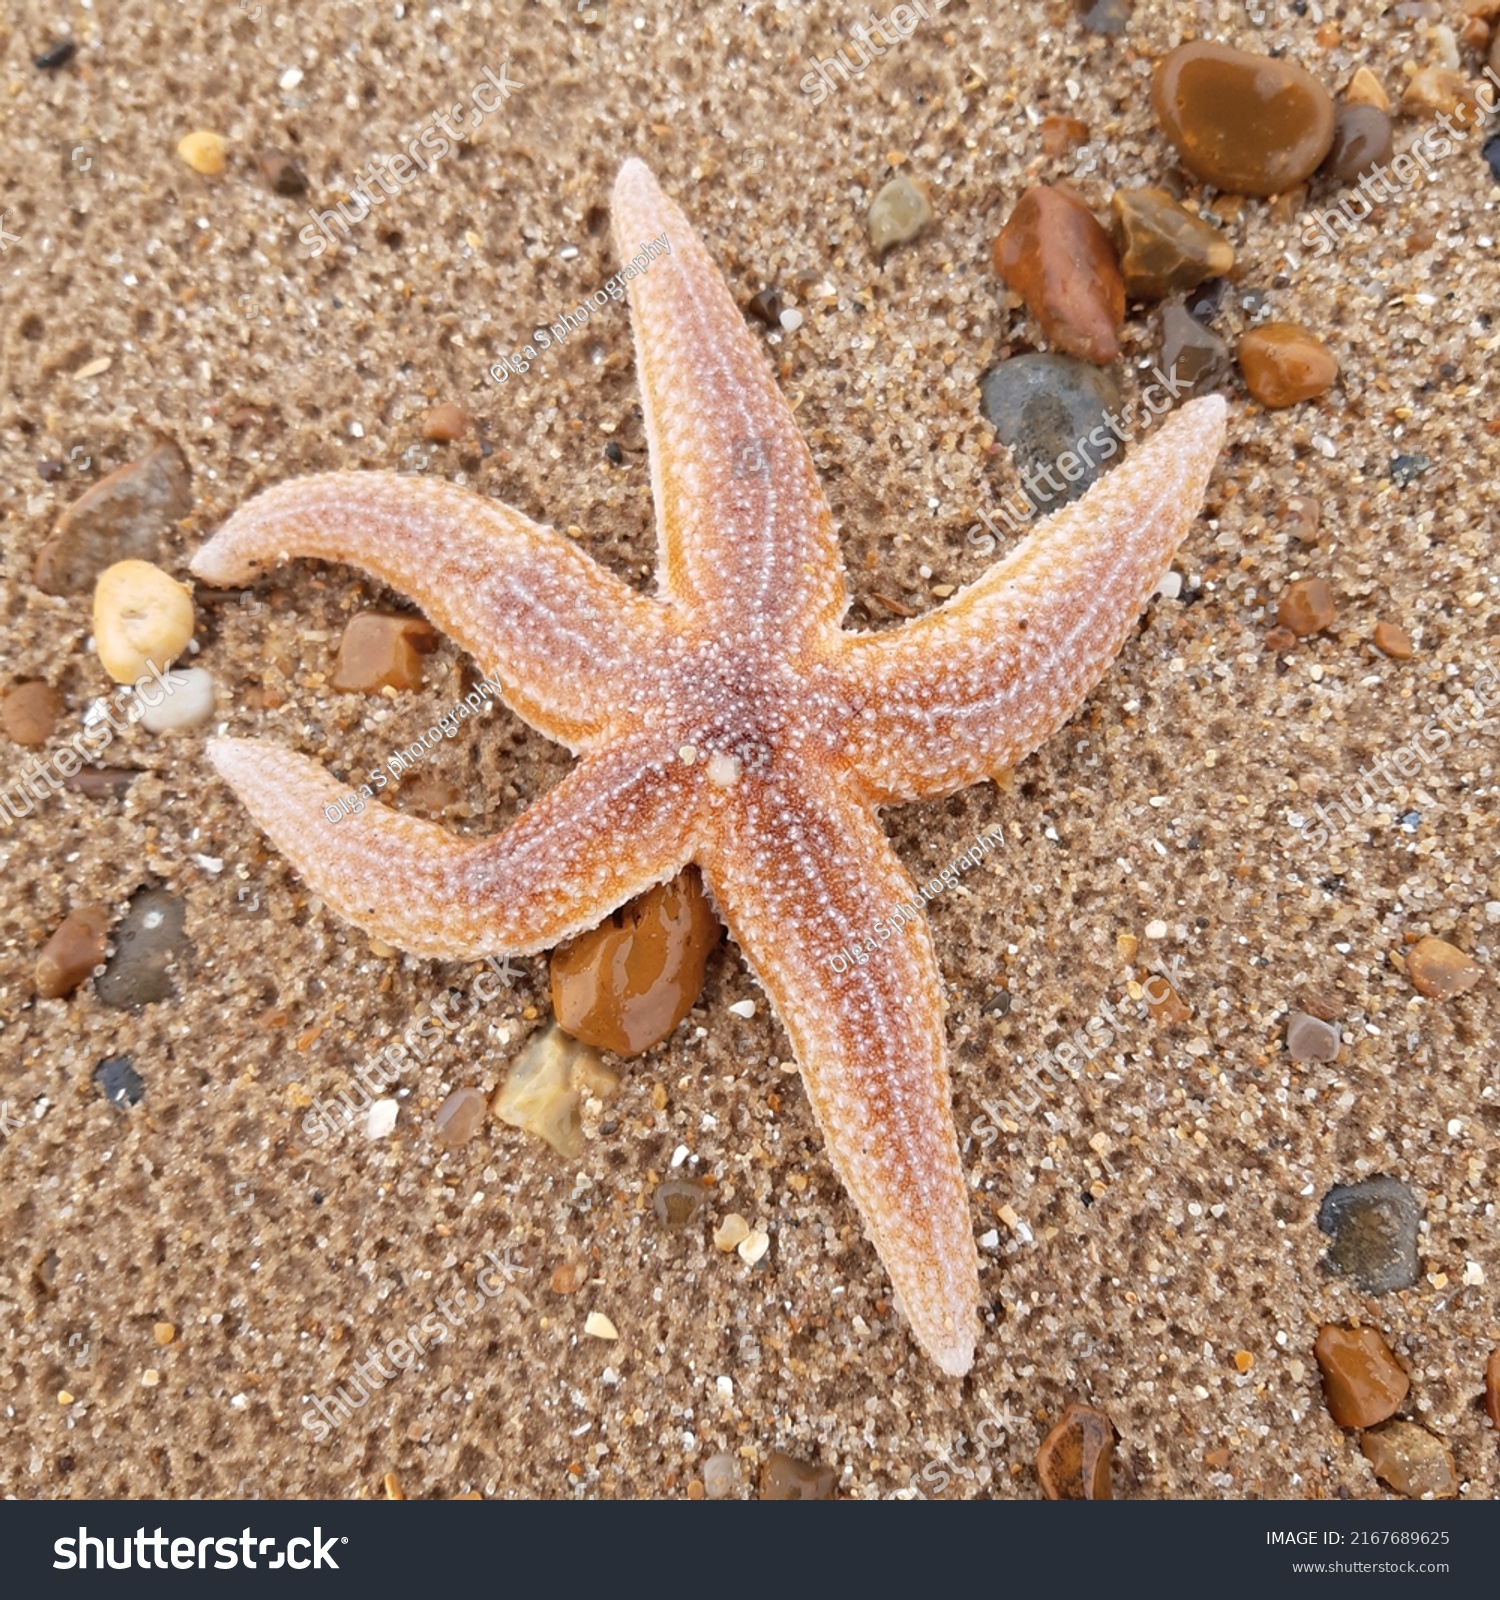 Starfish or sea stars are star-shaped echinoderms belonging to the class Asteroidea. Starfish on the beach in Landguard nature reserve in Felixstowe, Suffolk, East Anglia,  England, Europe. #2167689625